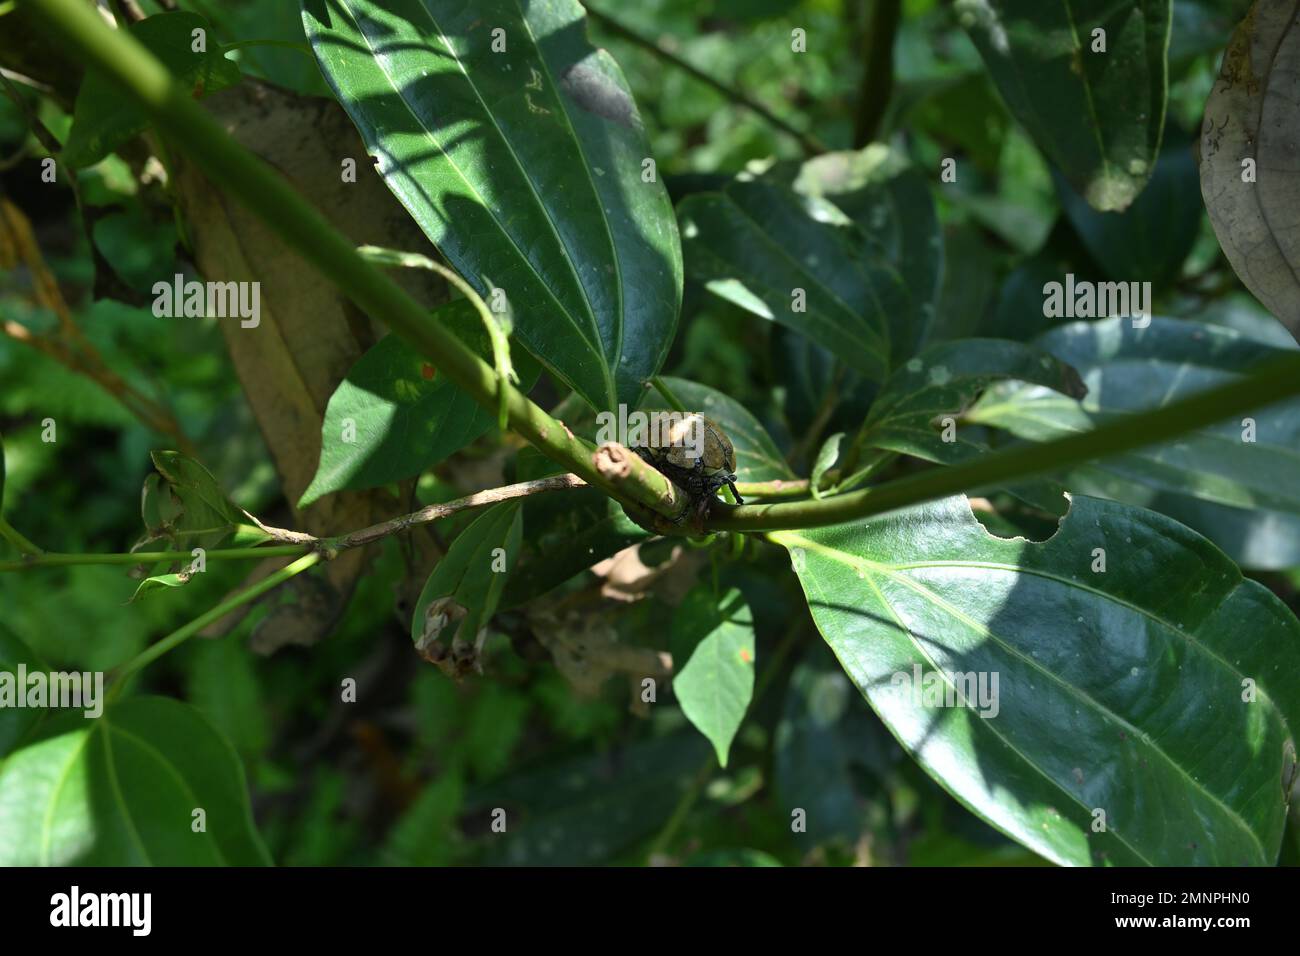 A head view of a Coconut beetle sitting on cinnamon stem view from above Stock Photo